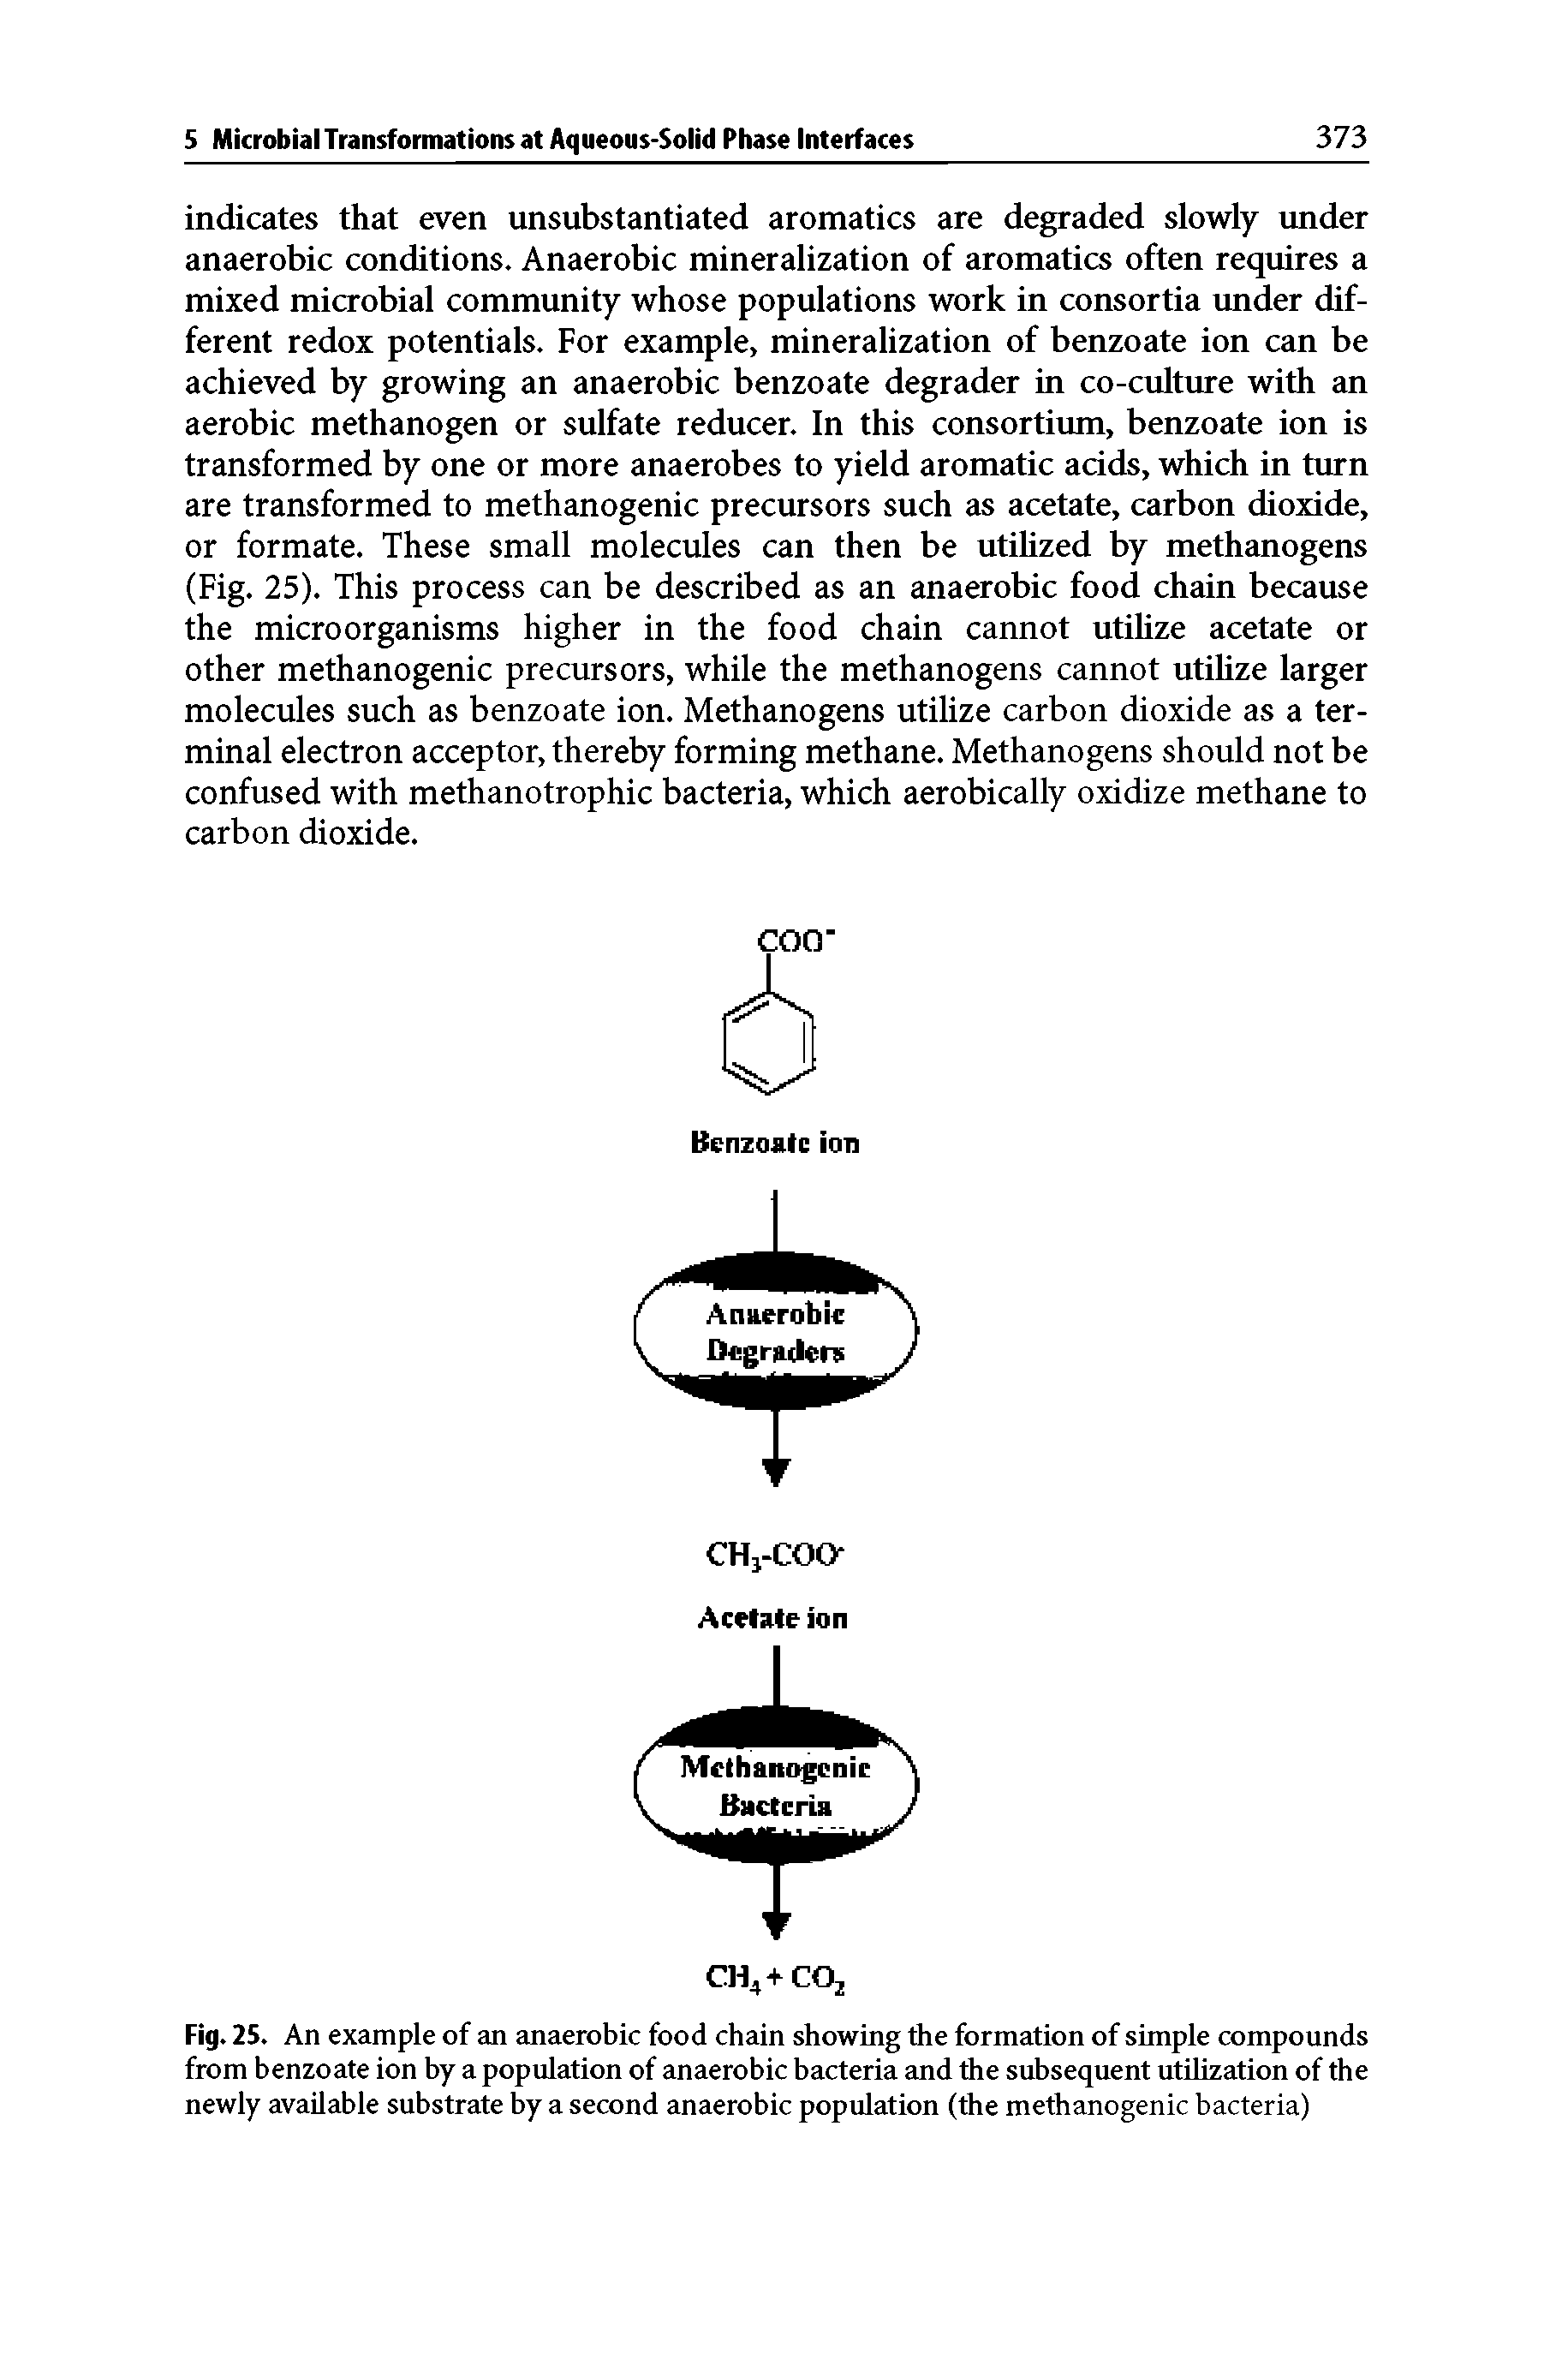 Fig. 25. An example of an anaerobic food chain showing the formation of simple compounds from benzoate ion by a population of anaerobic bacteria and the subsequent utilization of the newly available substrate by a second anaerobic population (the methanogenic bacteria)...